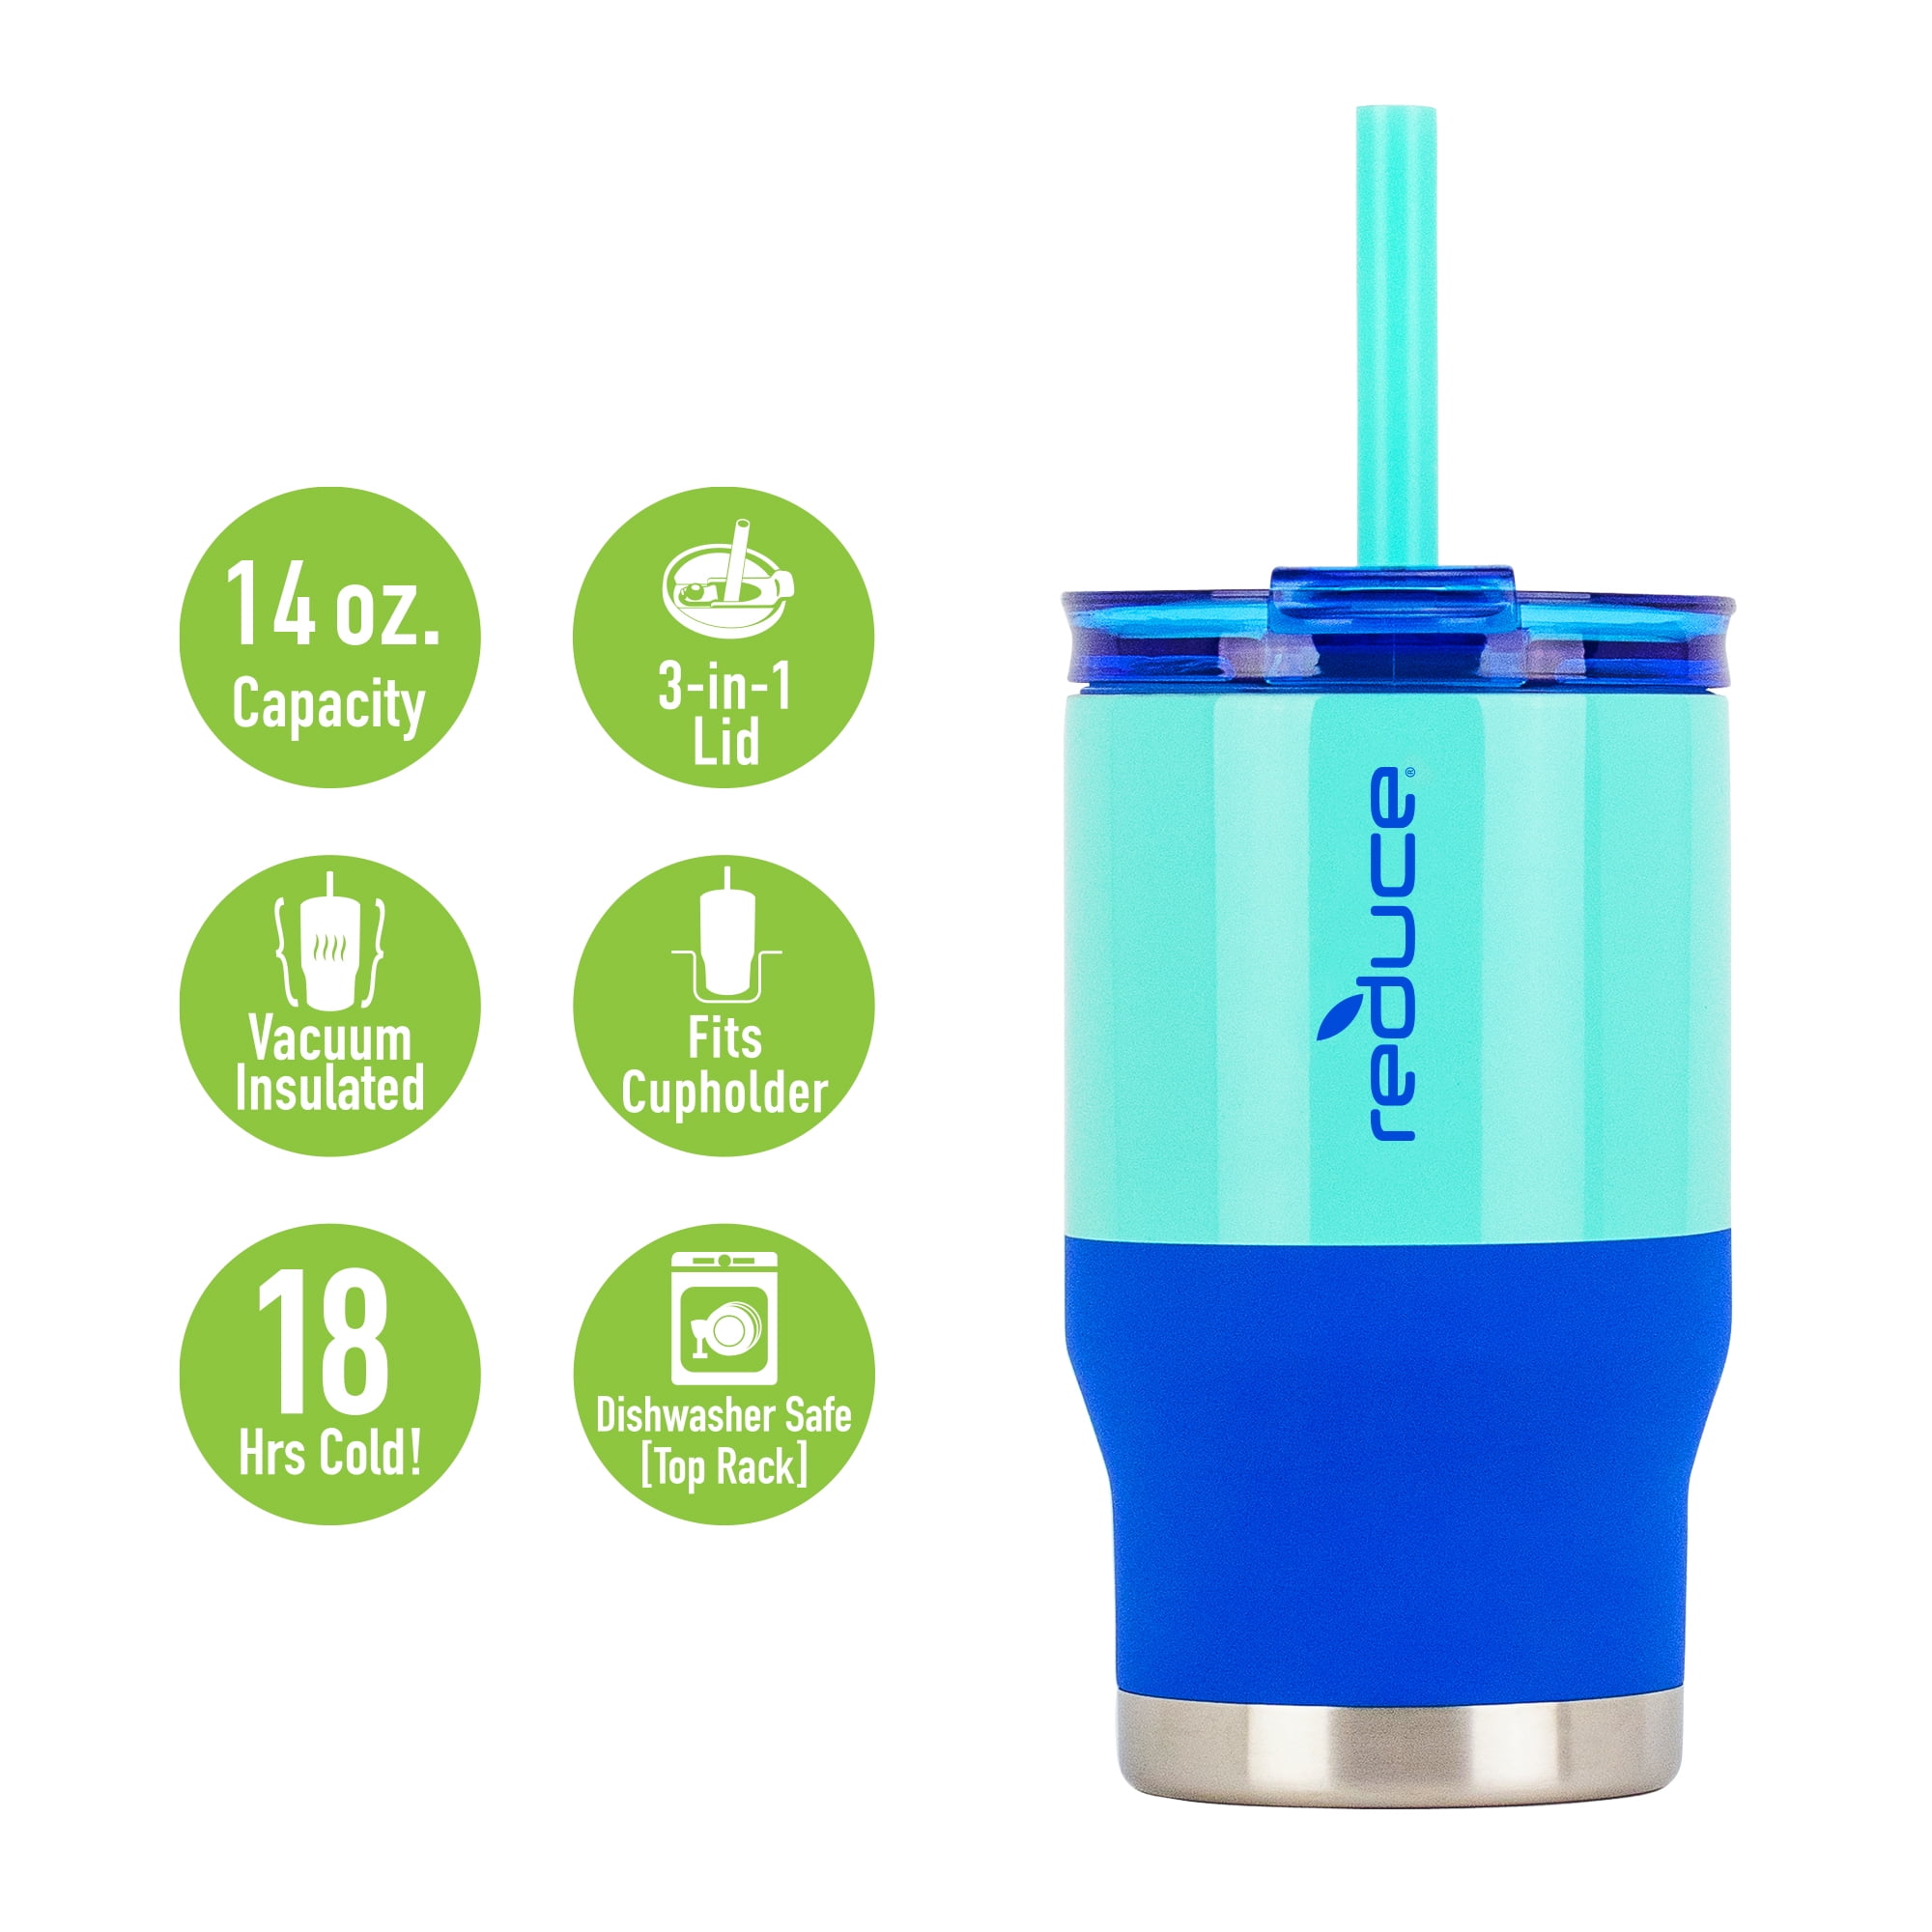 Reduce Coldee Vacuum Insulated Tumbler For Kids 14oz Ages 3+ 3in1